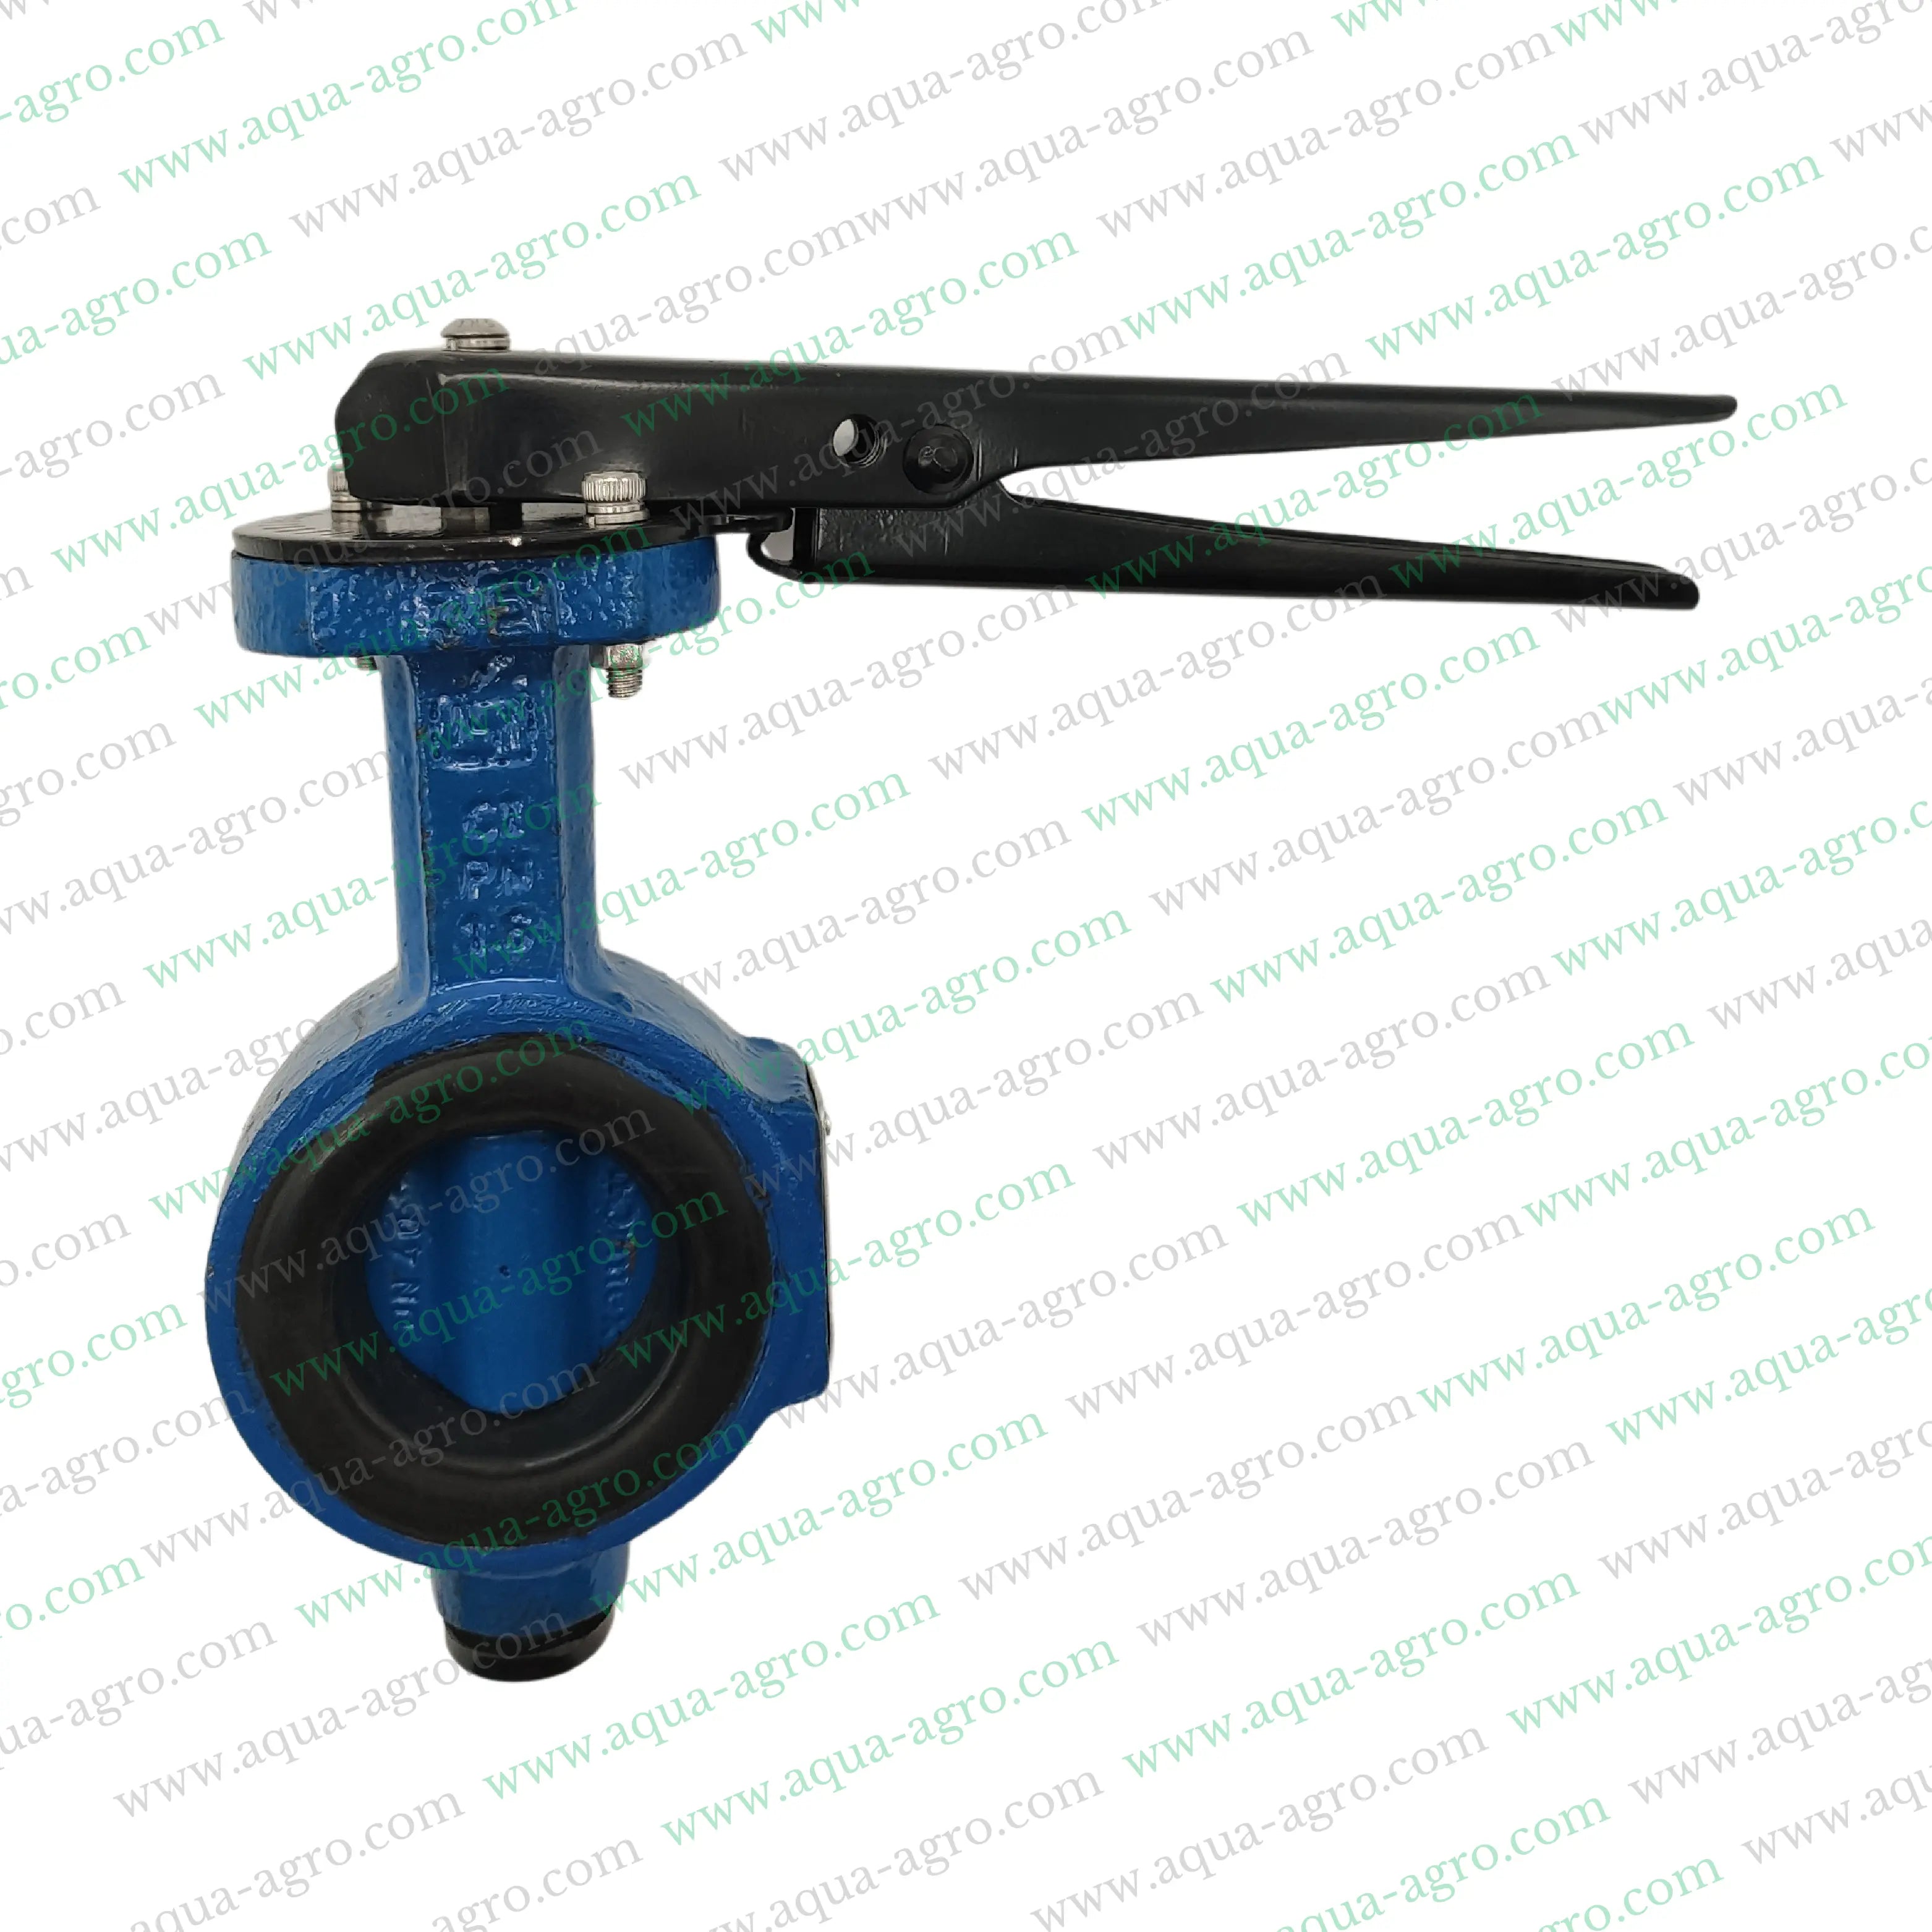 NORMEX | Valves - Butterfly Valves - Metal - C.I Body with SG Metal disc - 1.5" (40mm)